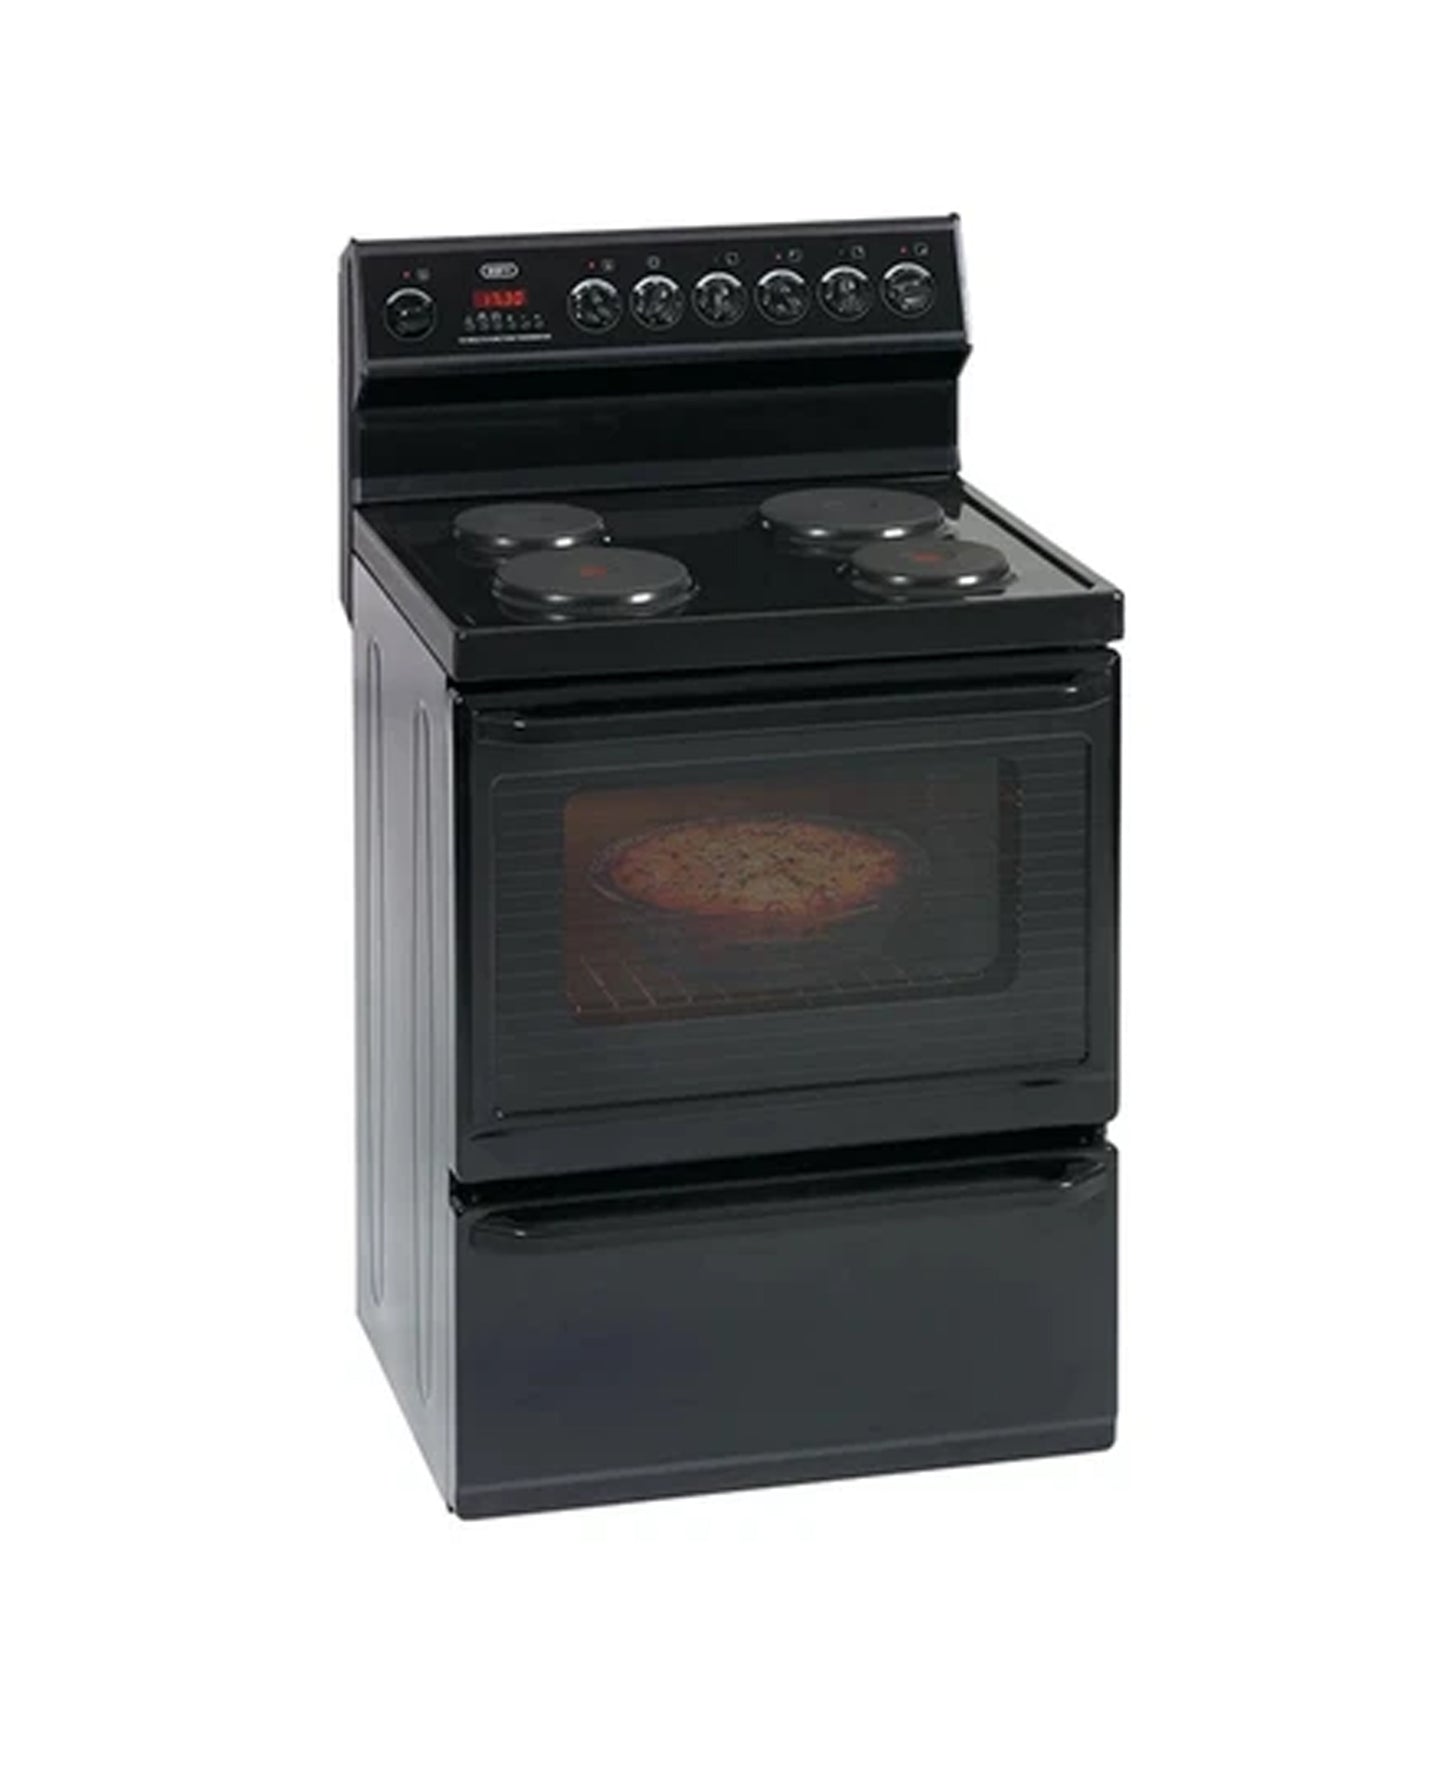 Defy 4 Plate Electric Stove - Black